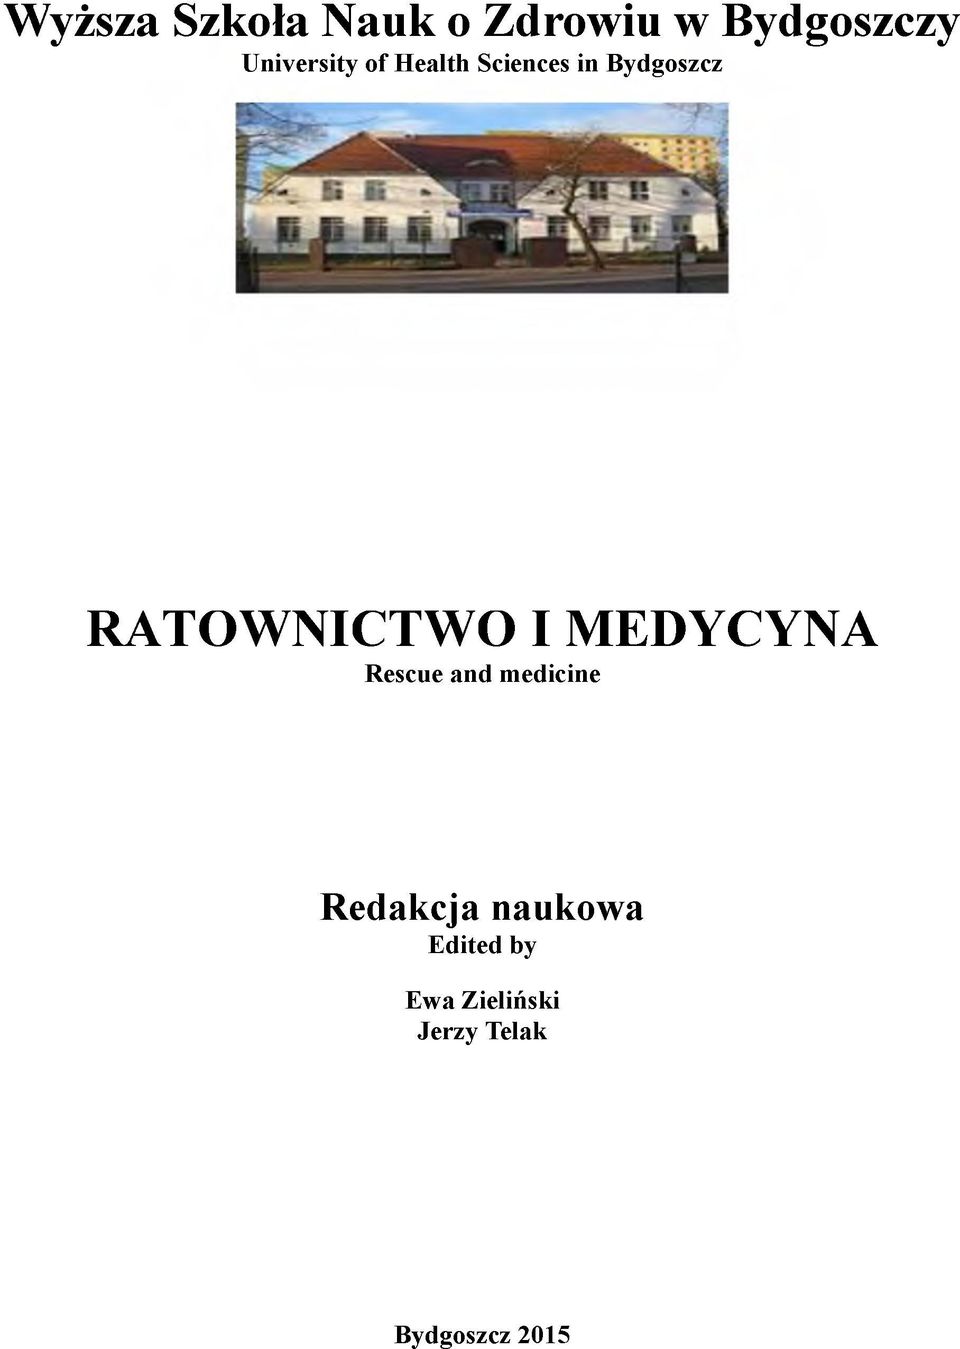 RATOWNICTWO I MEDYCYNA Rescue and medicine